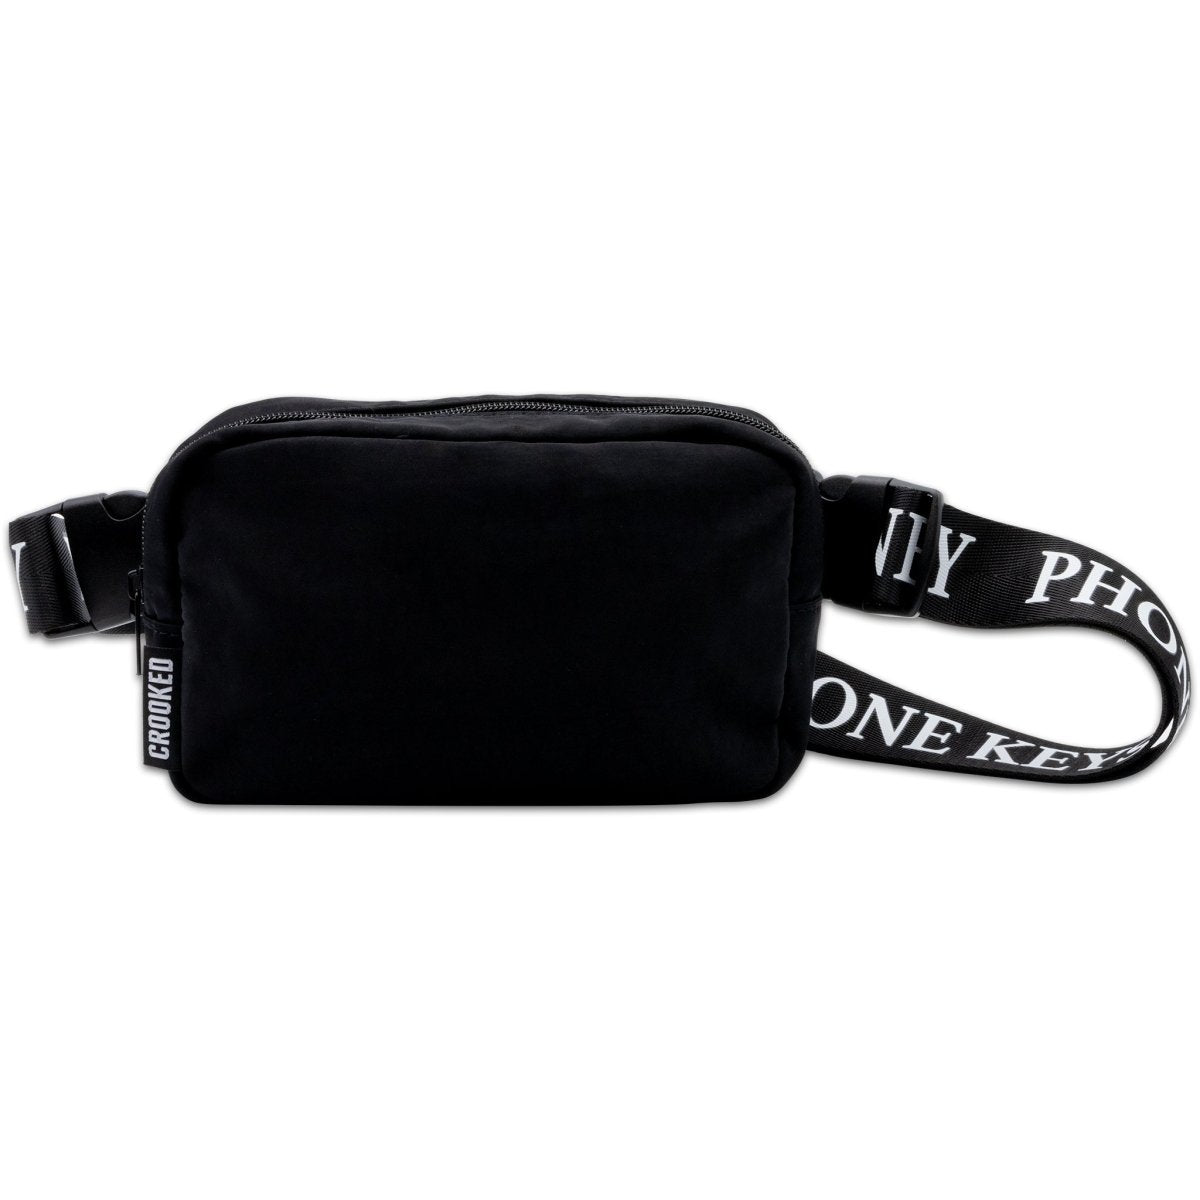 Crooked Belt Bag – Crooked Store